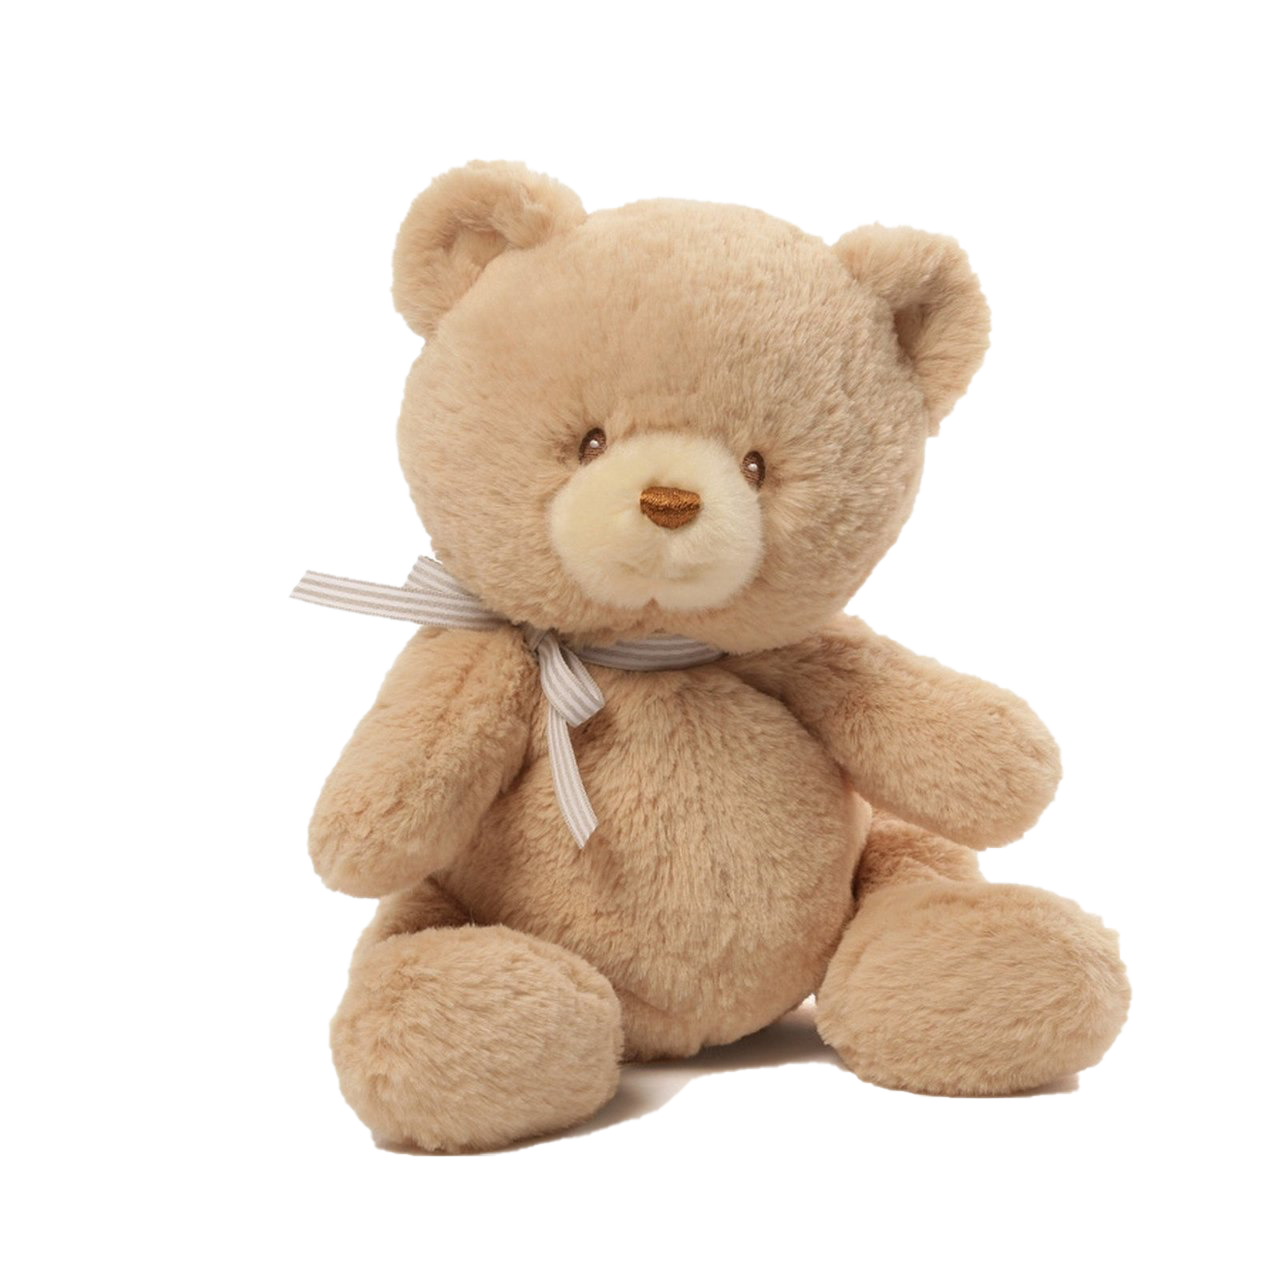 Download PNG image - Stuffed Teddy Bear PNG File 